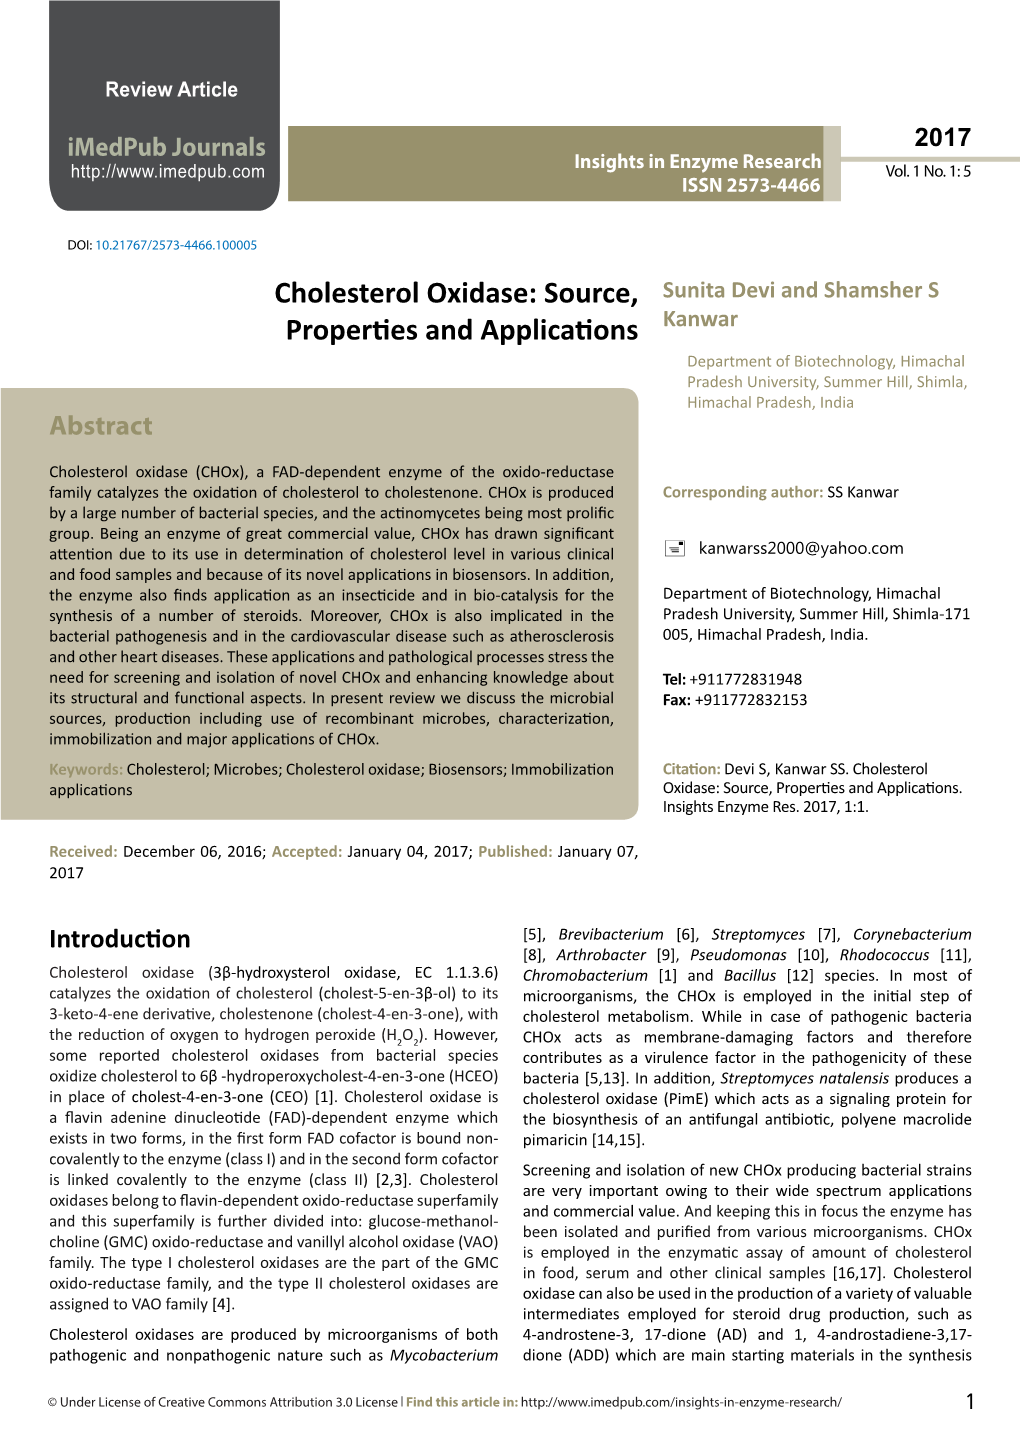 Cholesterol Oxidase: Source, Properties and Applications